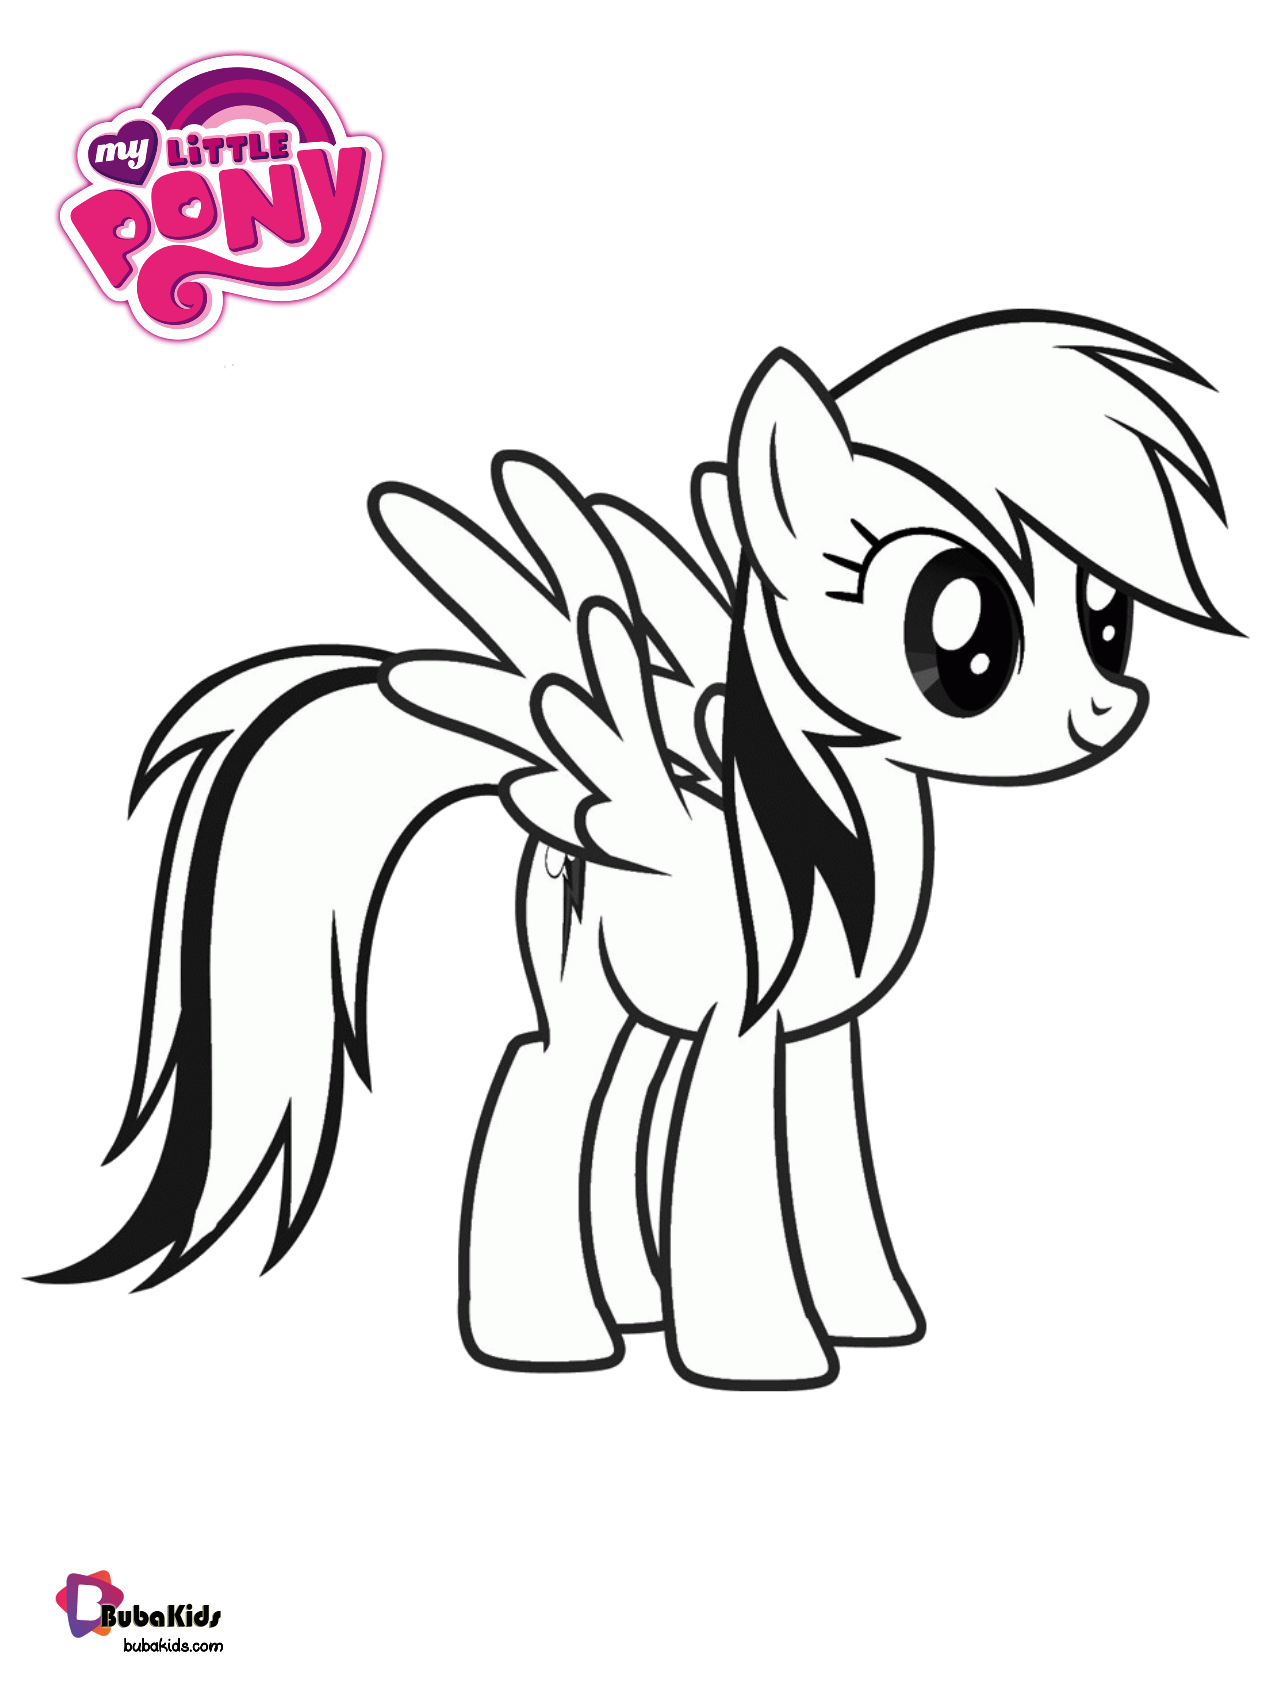 Cute my little pony coloring picture. Wallpaper